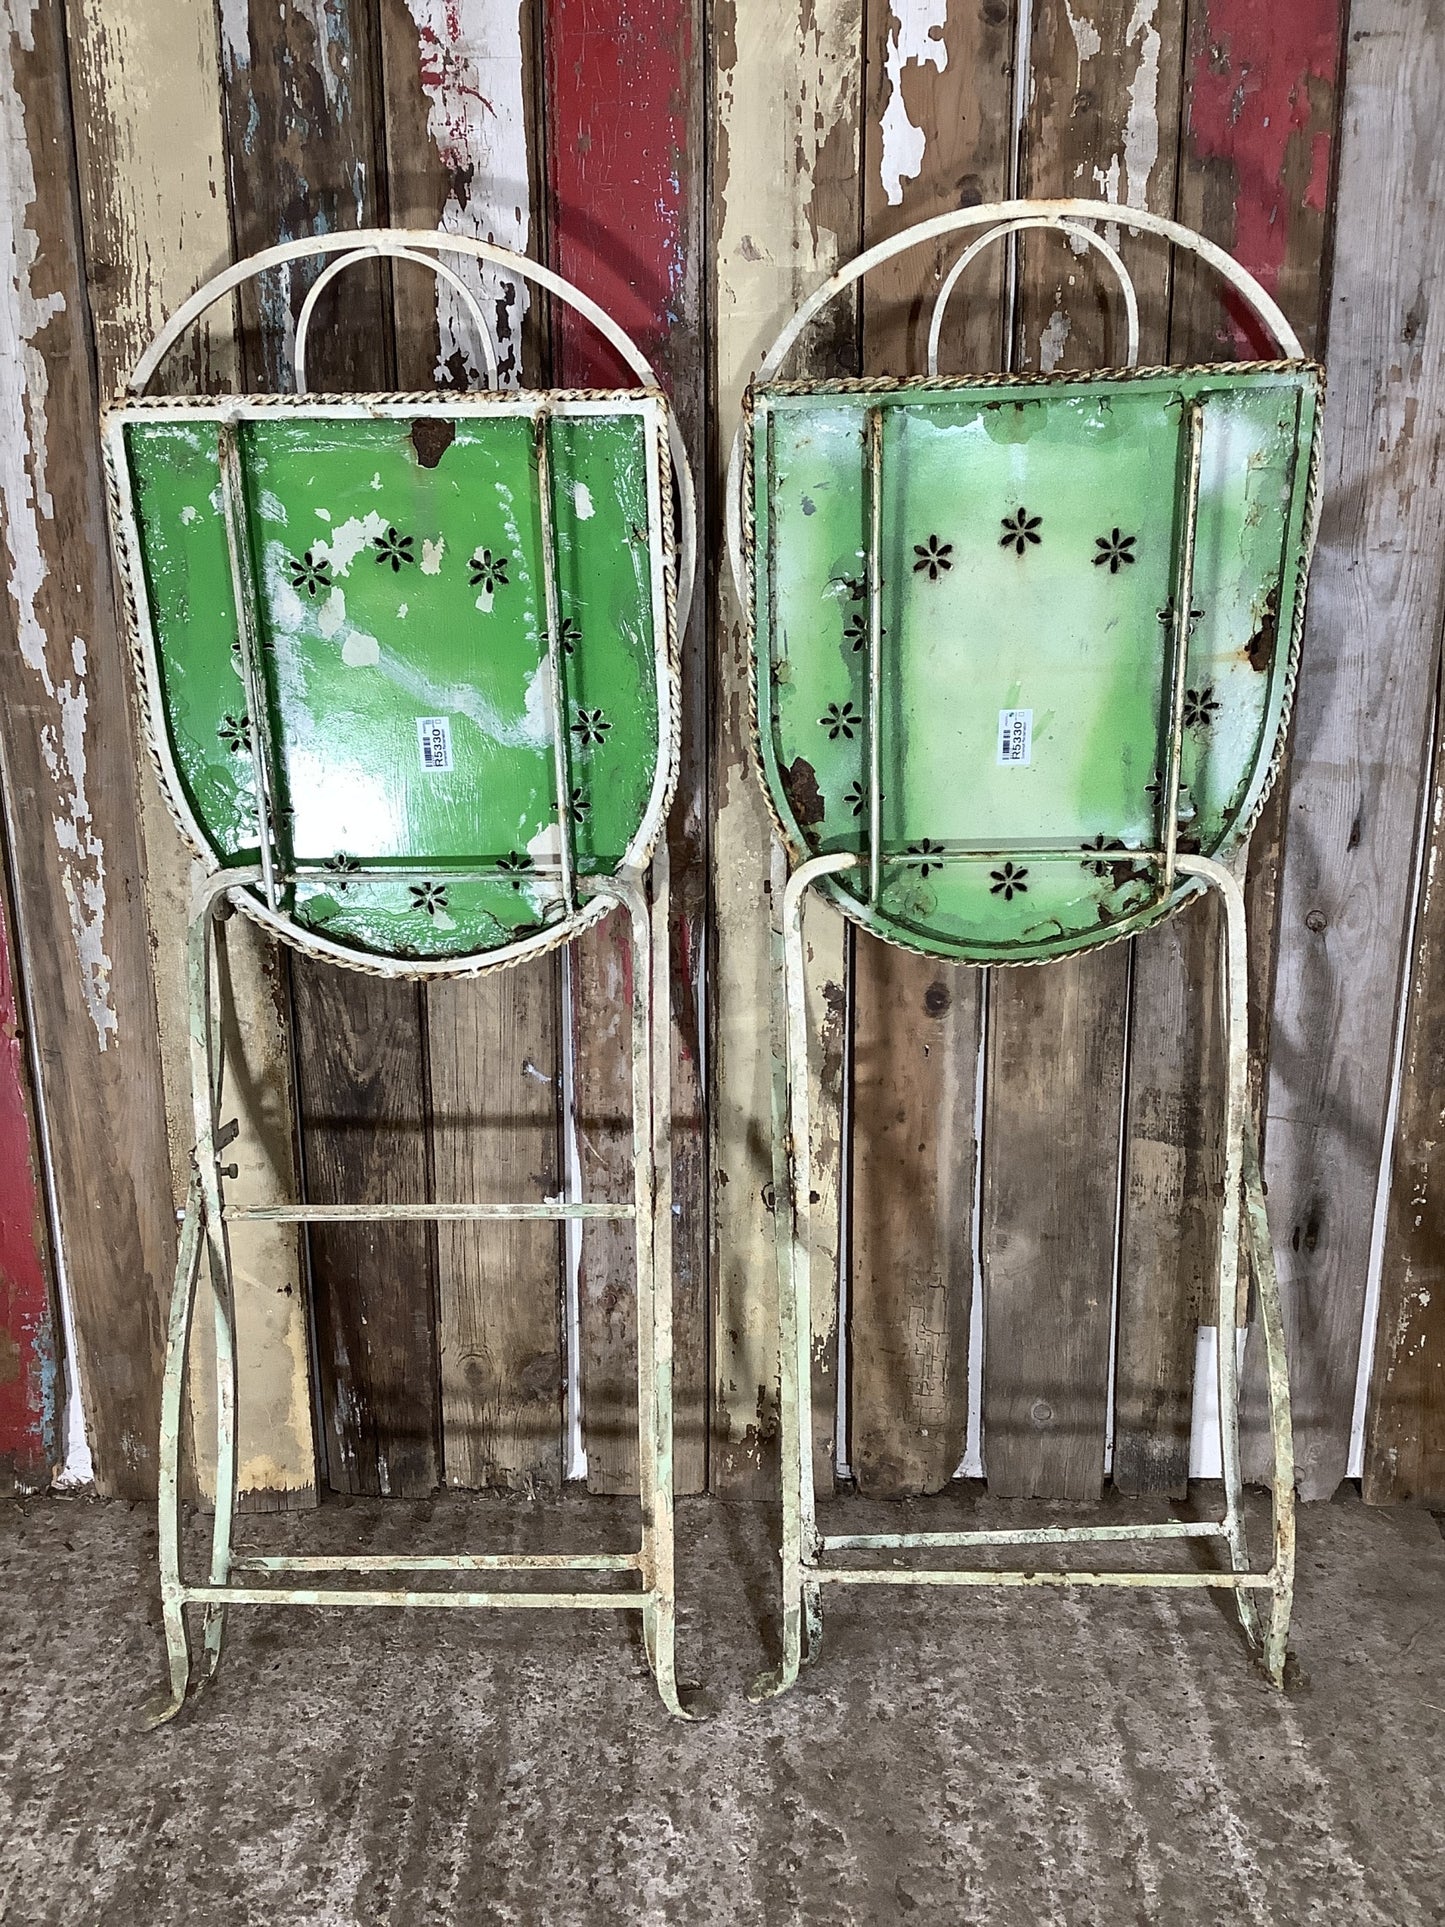 Rustic Old Painted Pair Of Steel Metal Foldable Garden Chairs 3'0"H